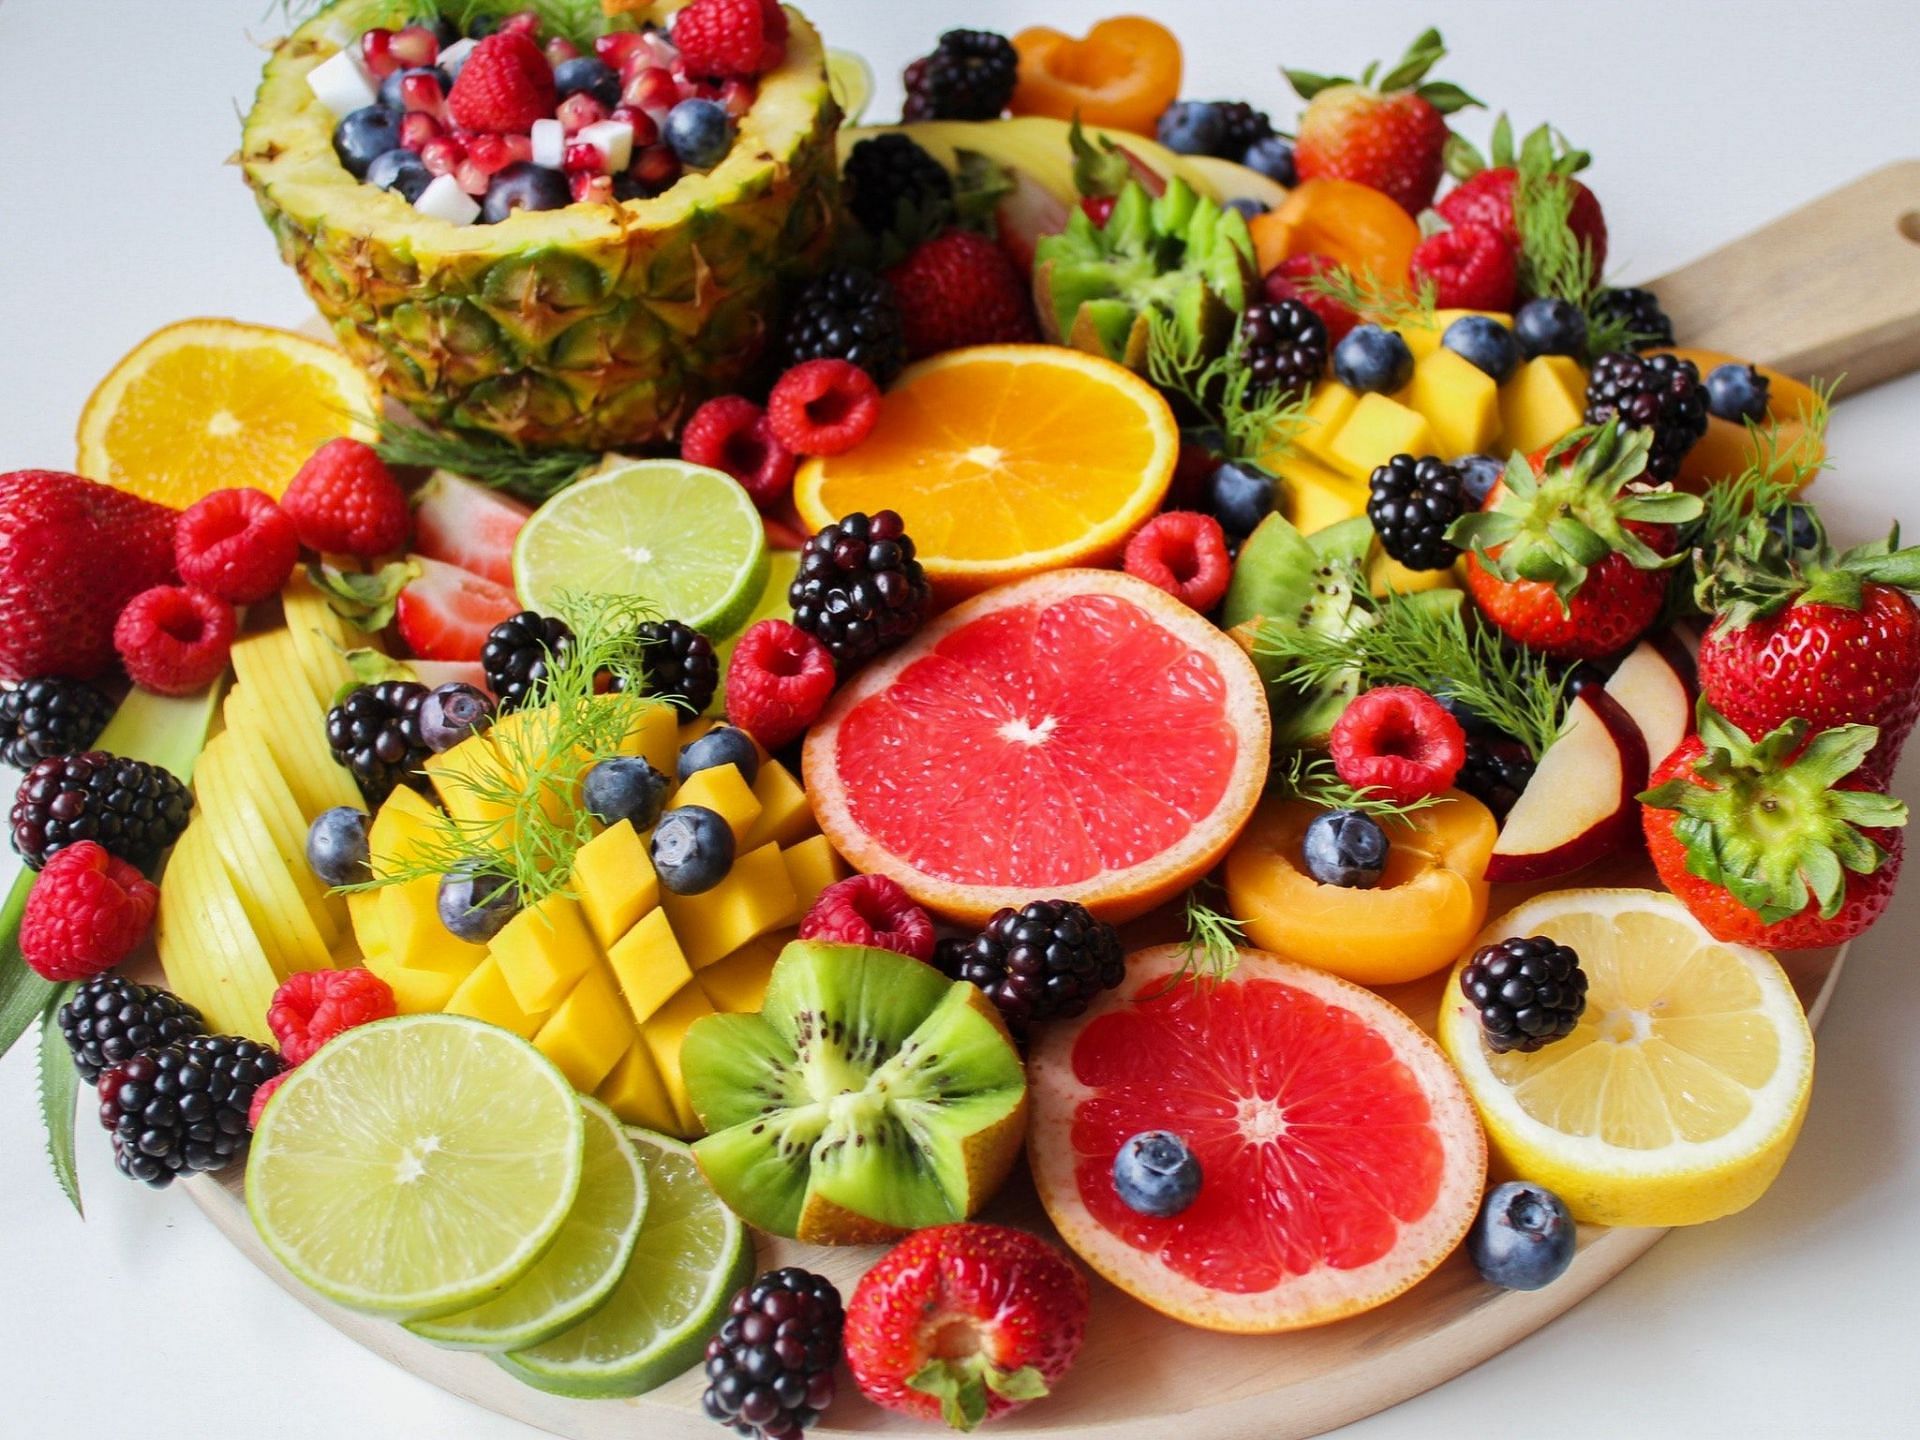 Importance of fruits (image sourced via Pexels / Photo by Jane Doan)